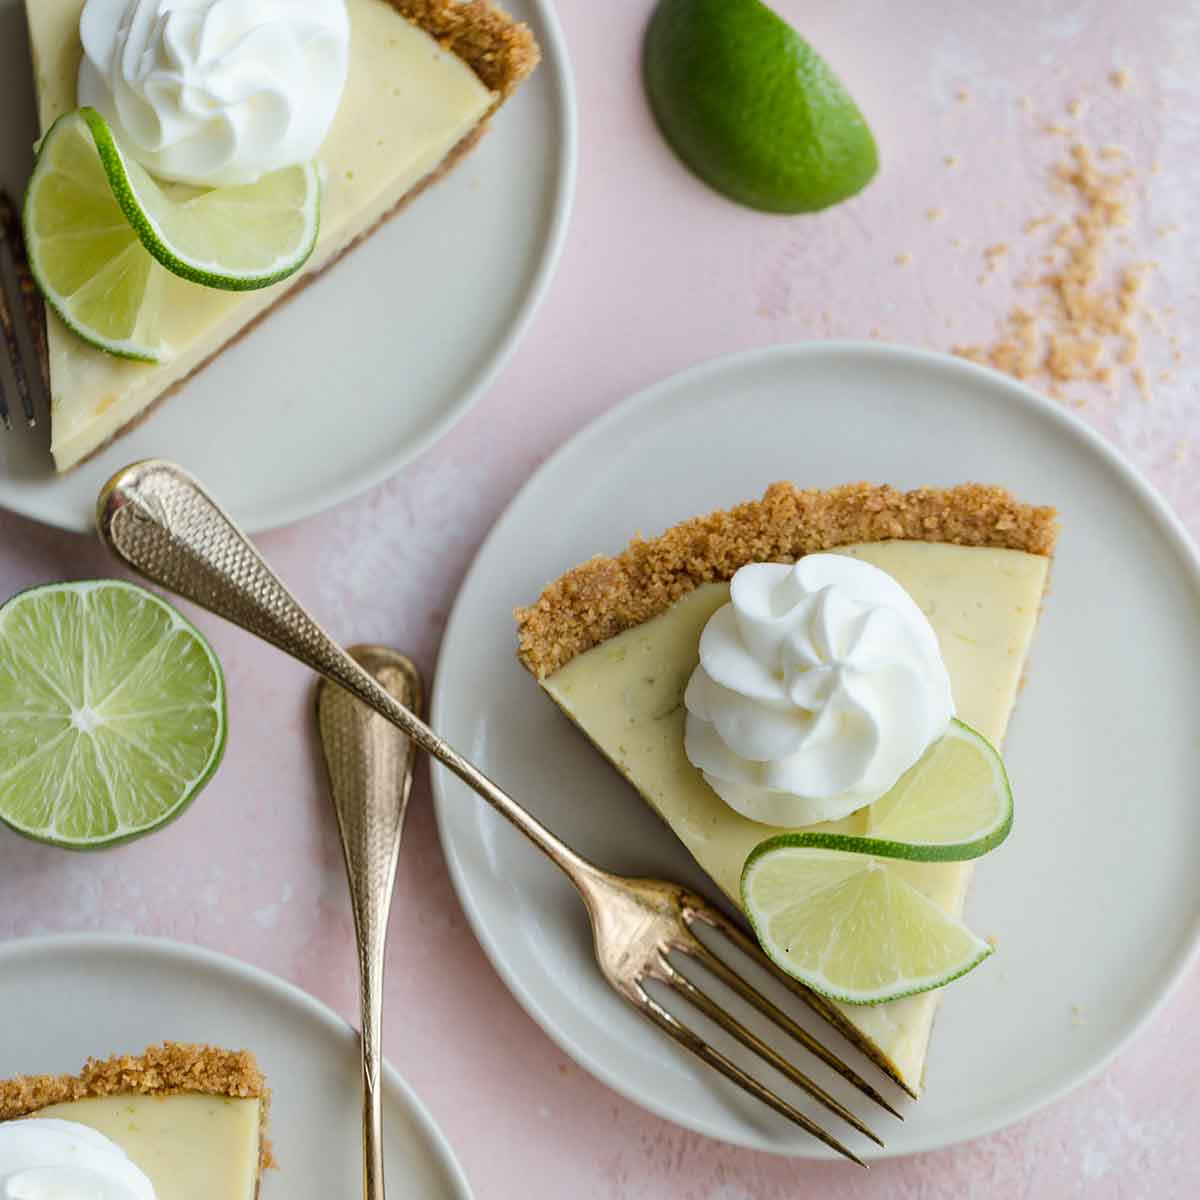 Slices of key lime pie on plates with dollops of whipped cream and lime slices.